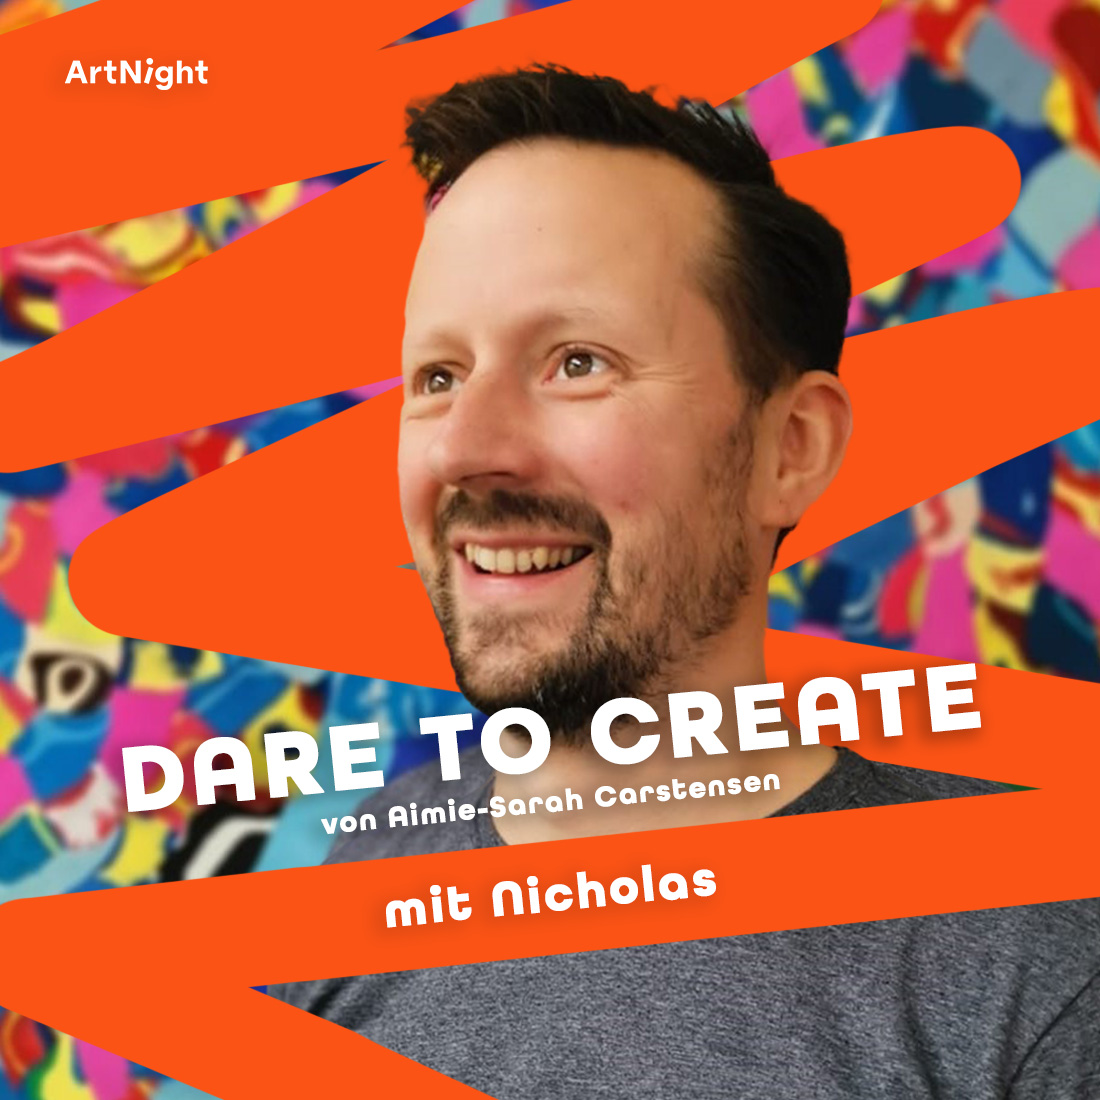 Nicholas is the co-founder of Nic&Mic, an organization with a mission of cleaning up waste, turning it into something beautiful, and ensuring continuity of decent employment for the makers.